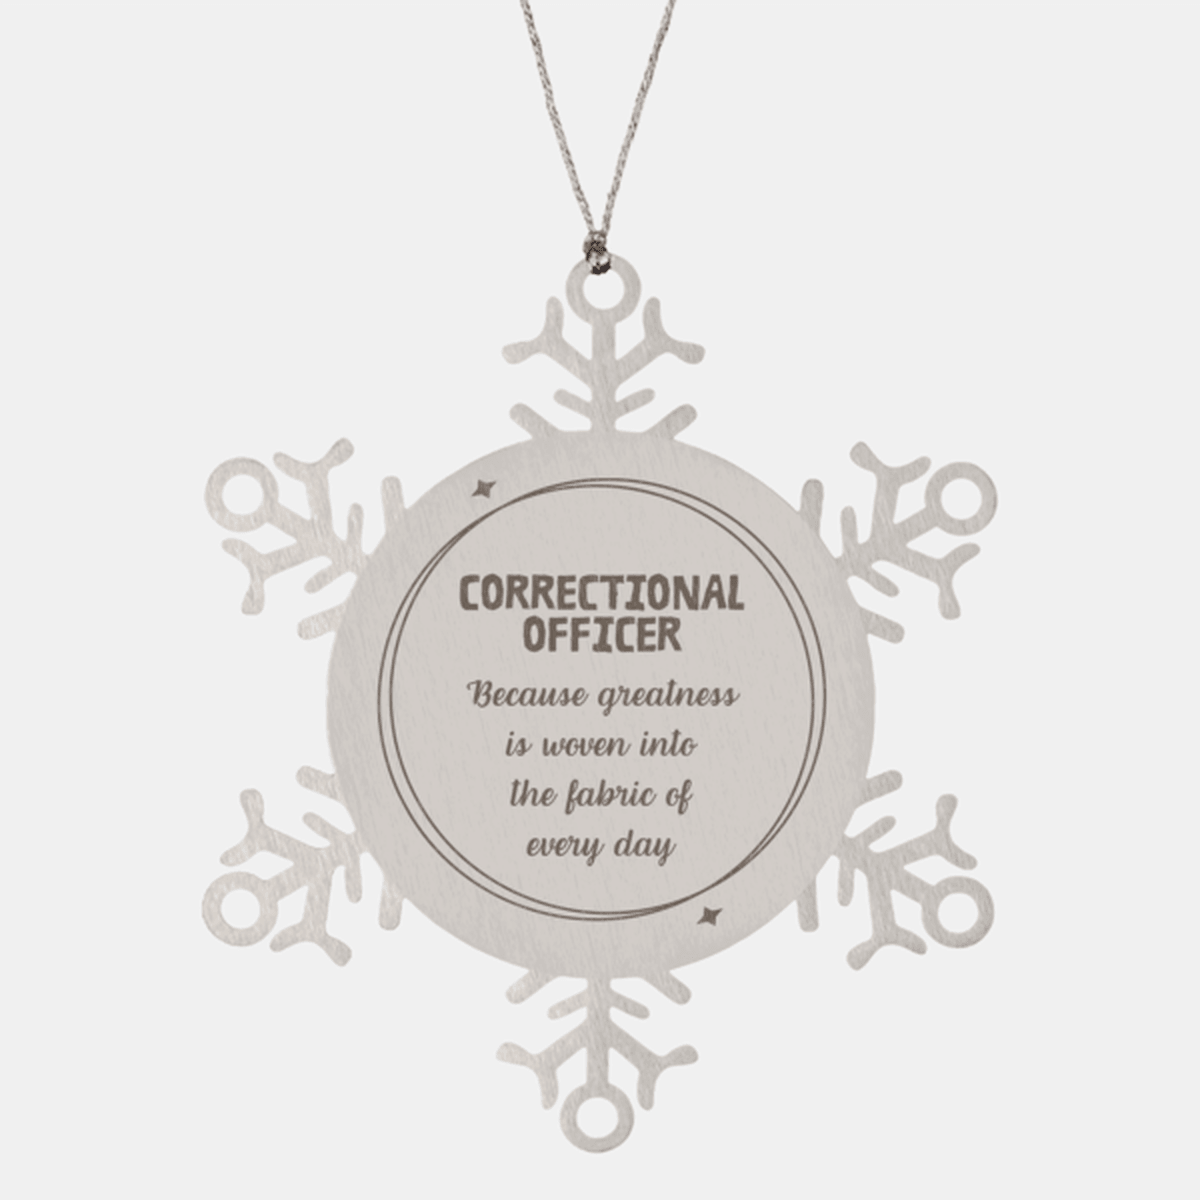 Sarcastic Correctional Officer Snowflake Ornament Gifts, Christmas Holiday Gifts for Correctional Officer Ornament, Correctional Officer: Because greatness is woven into the fabric of every day, Coworkers, Friends - Mallard Moon Gift Shop